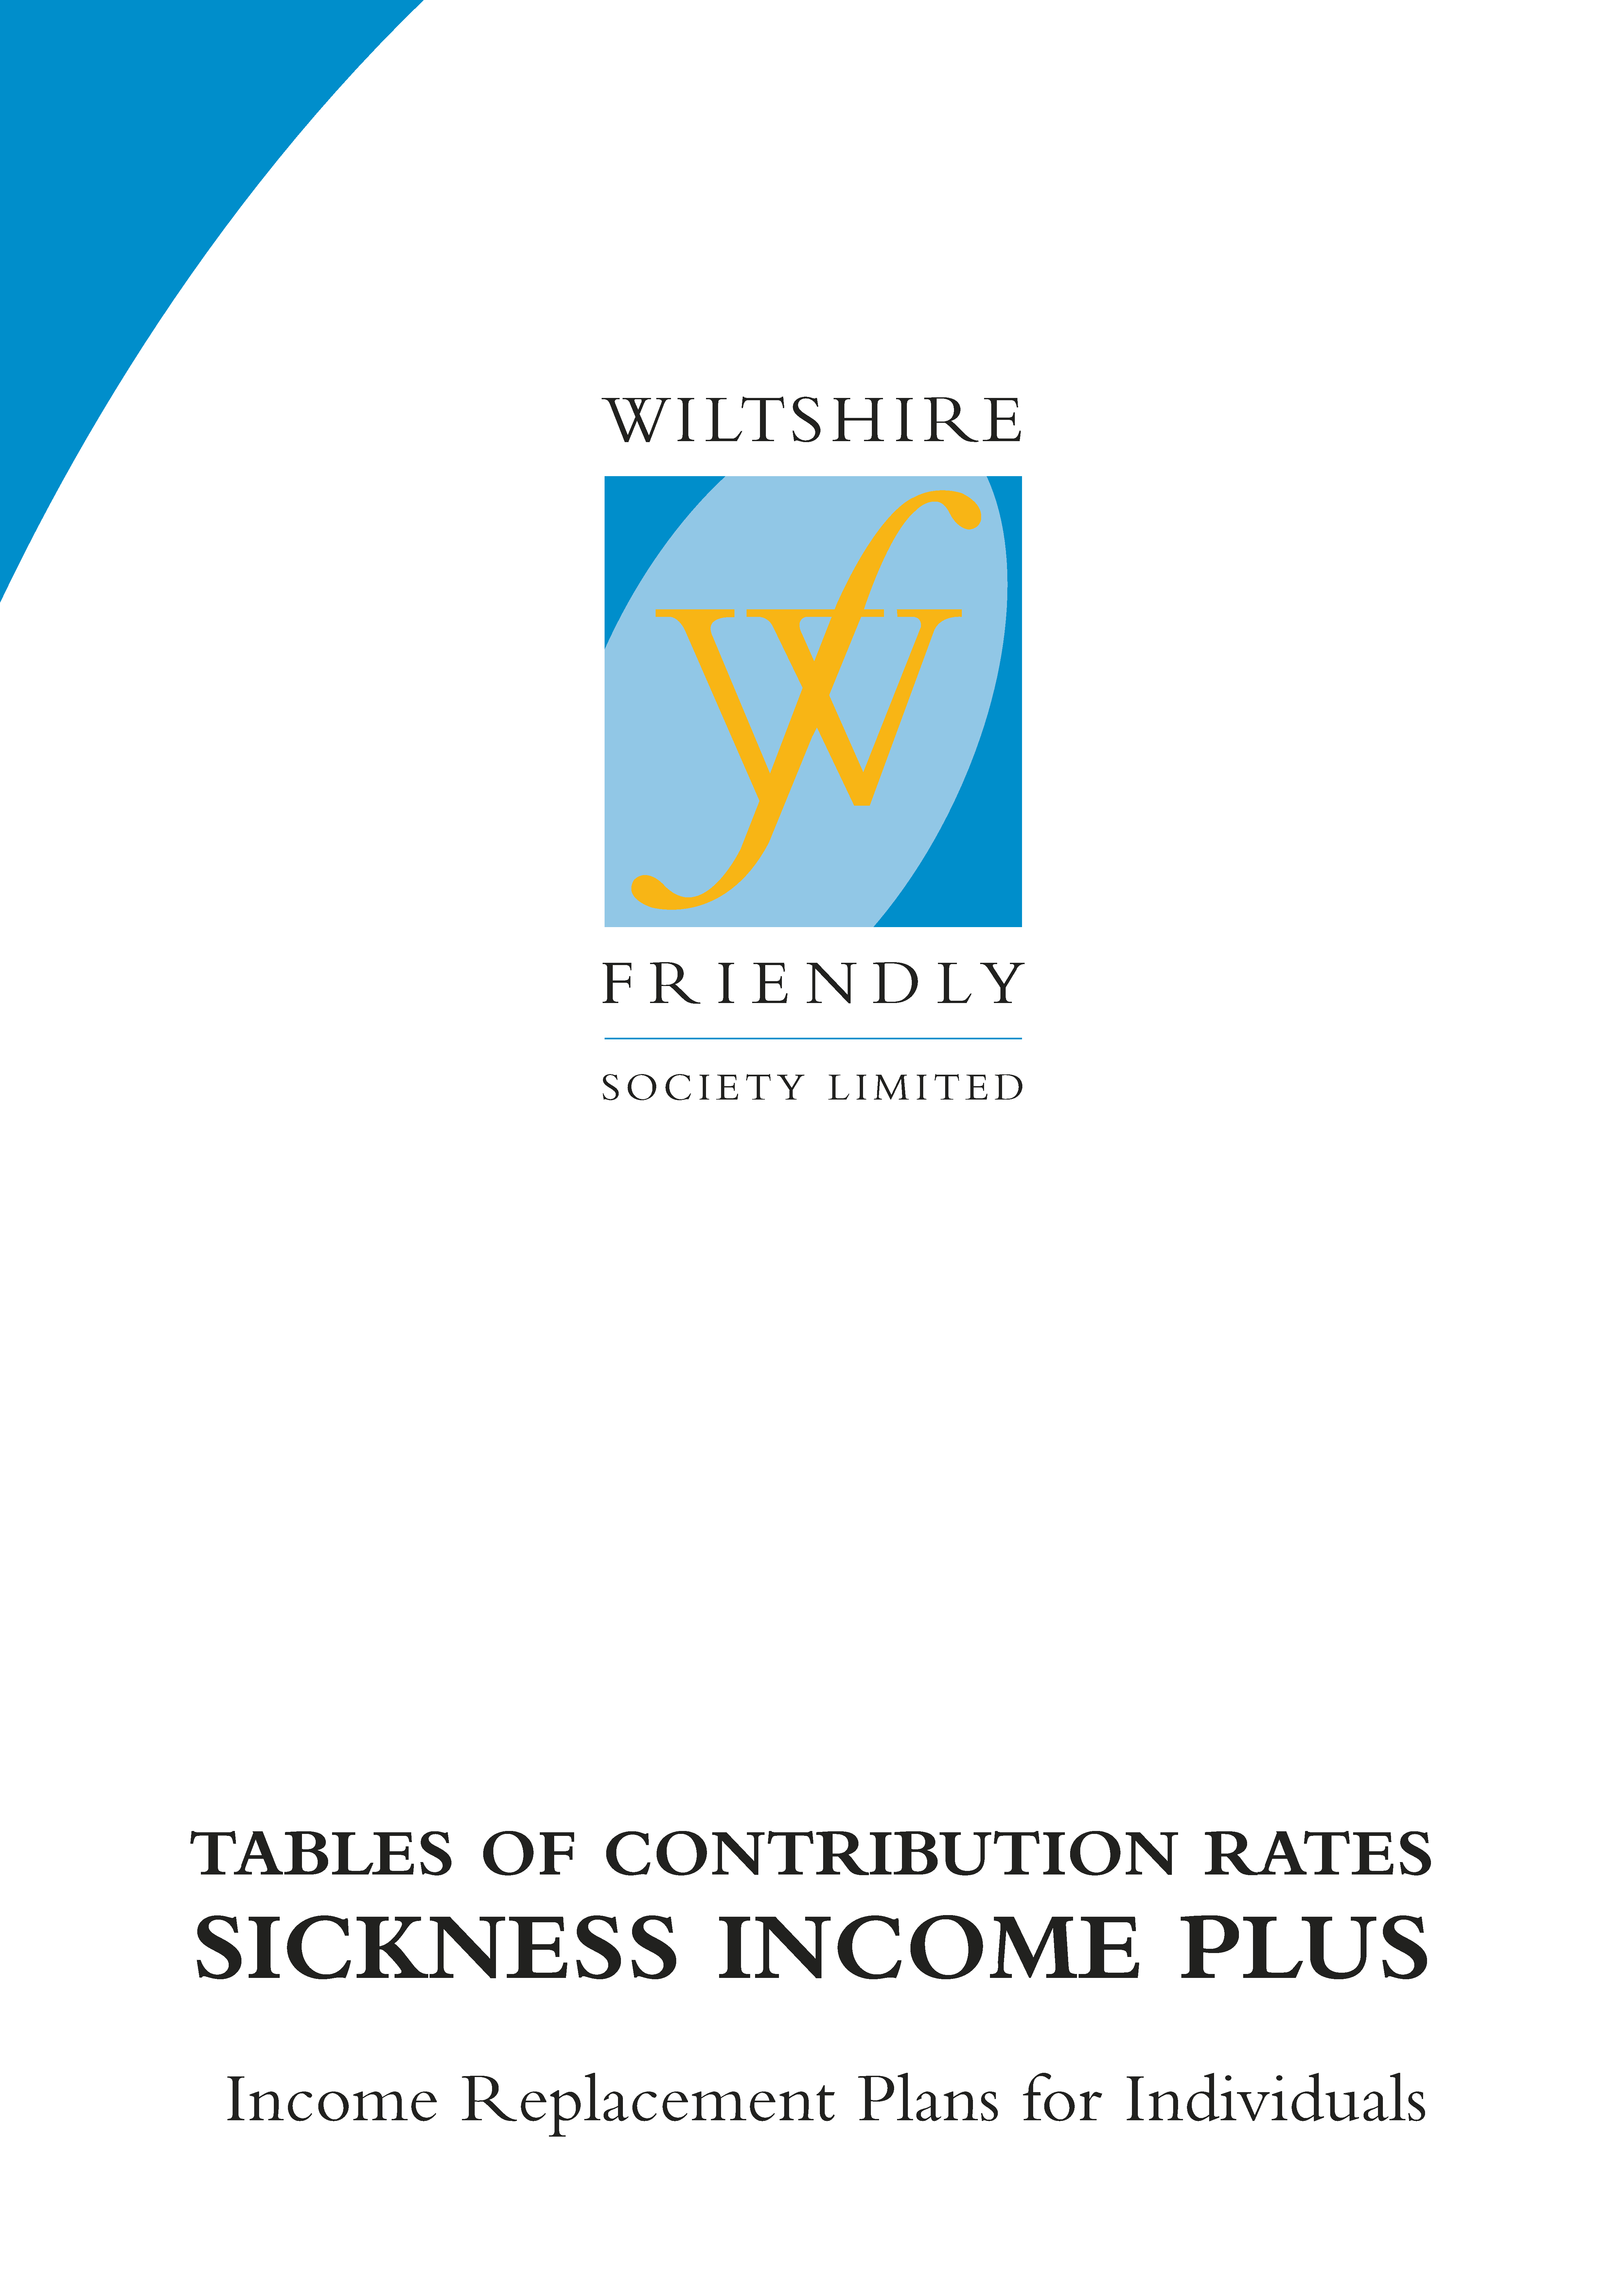 Contribution Tables